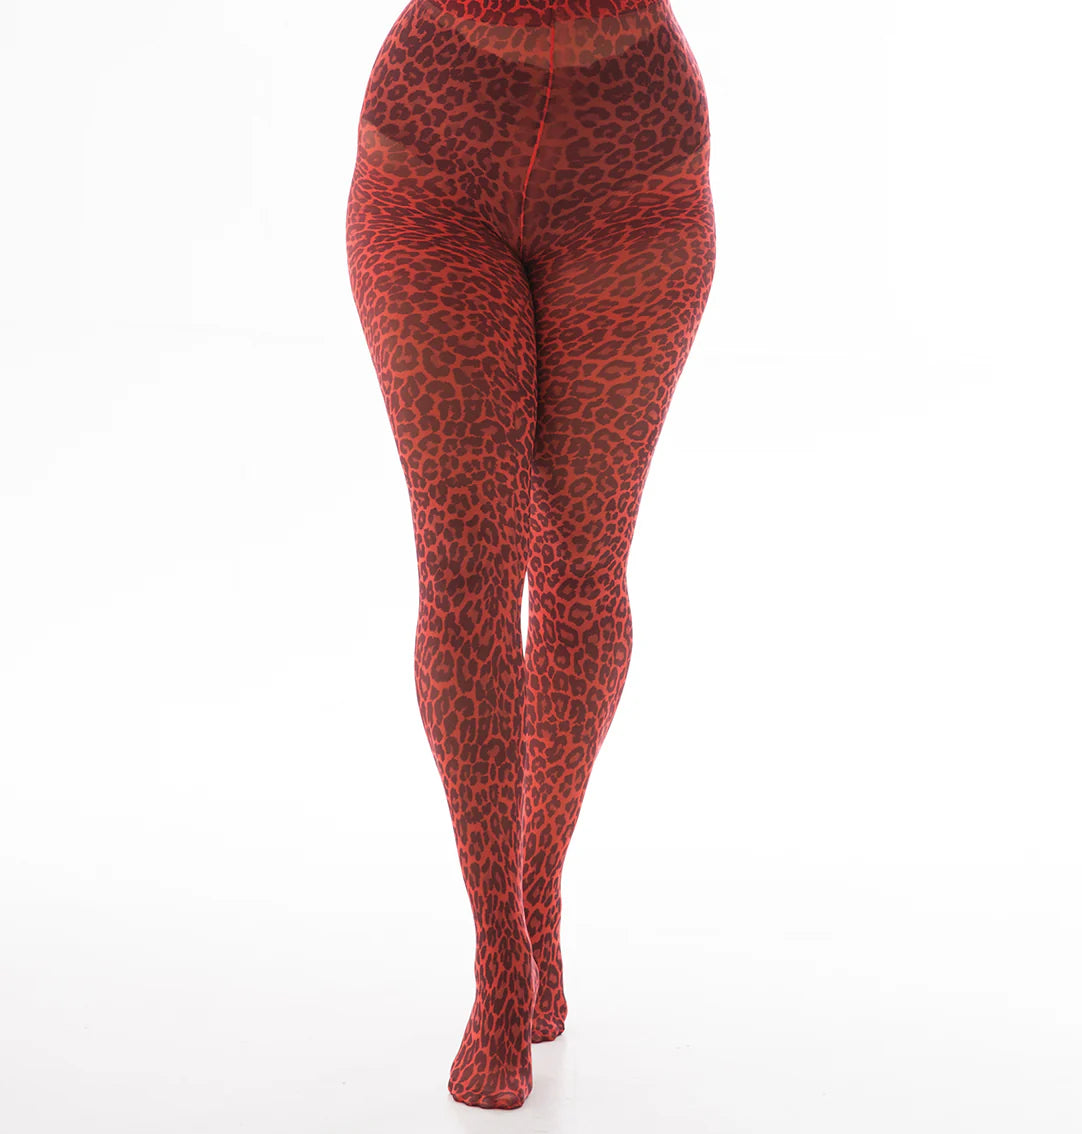 Small Leopard Printed Tights - One Size - Pamela Mann